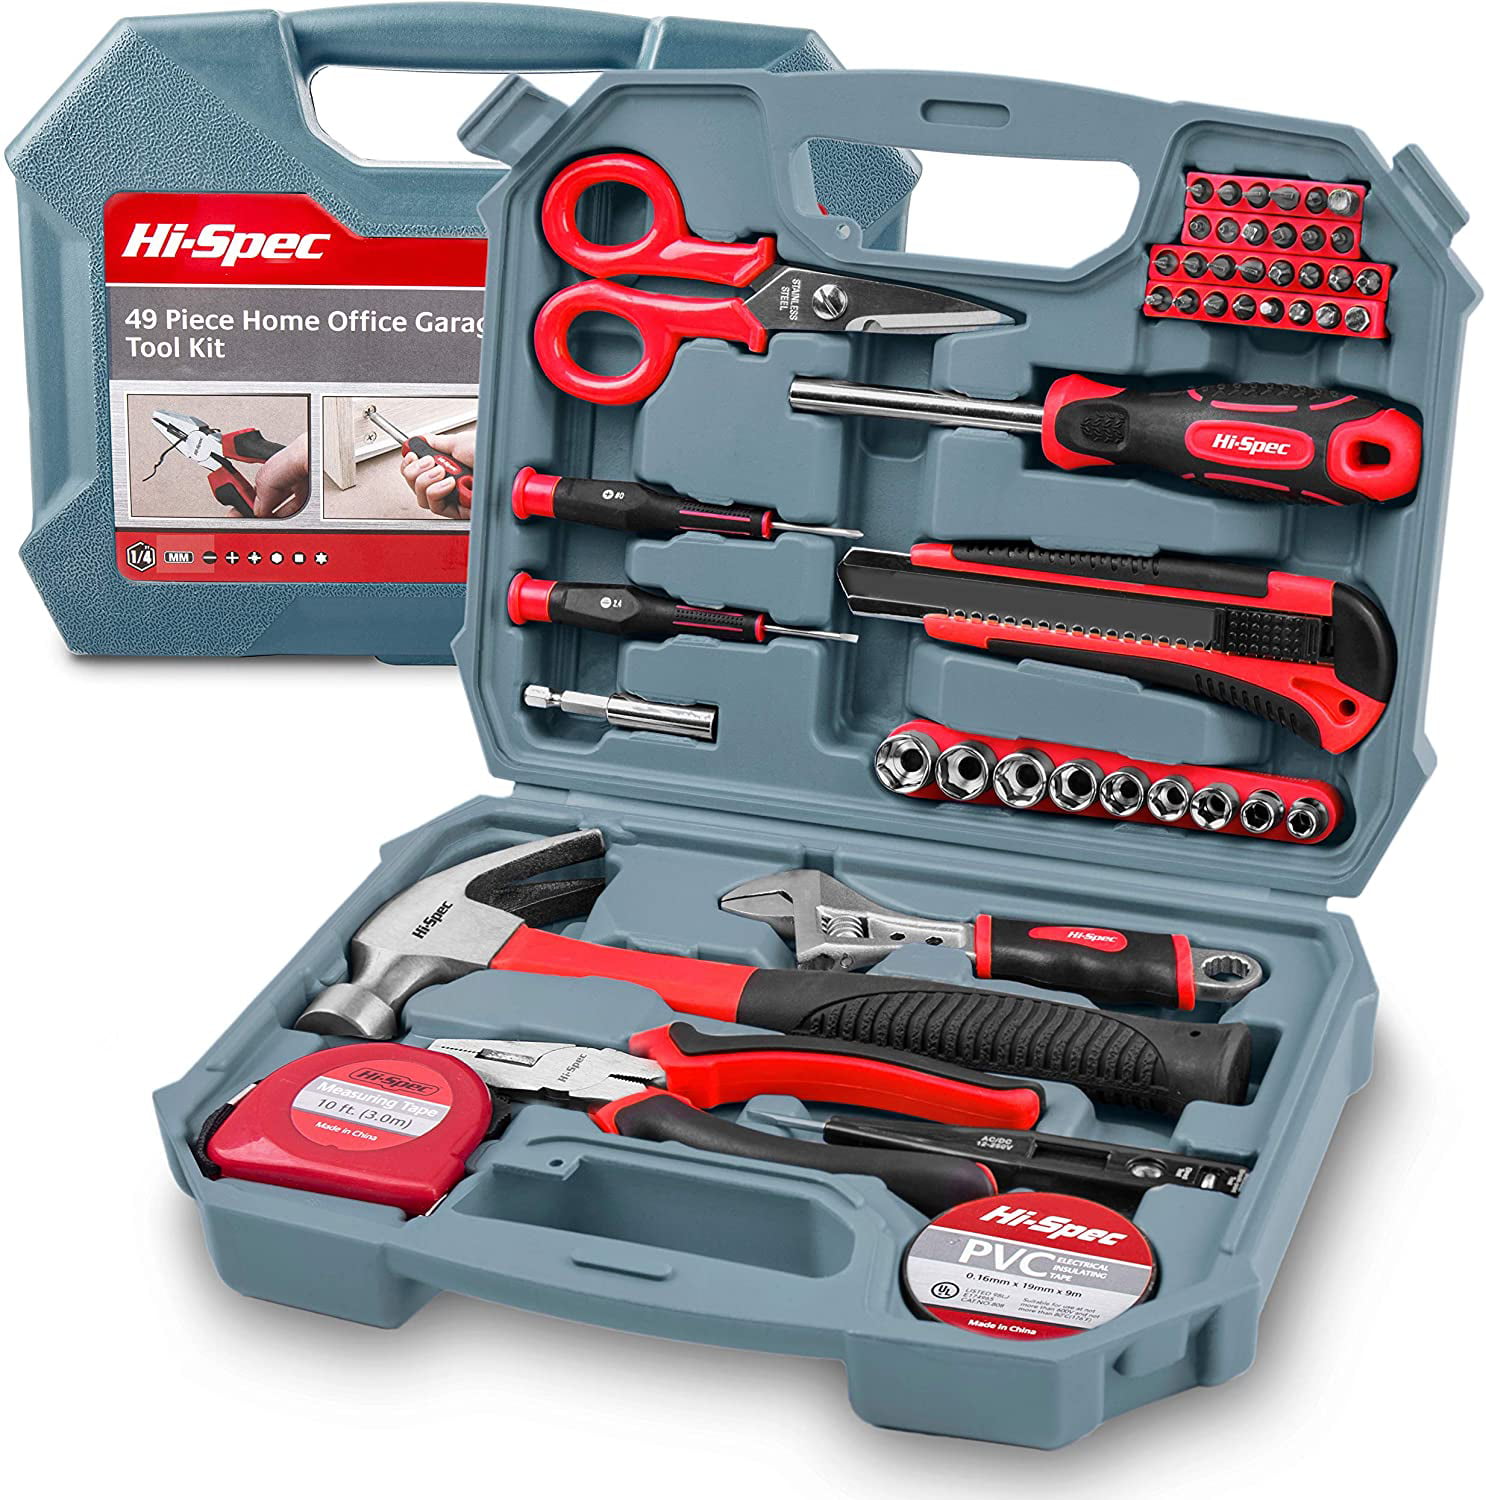 HYXQYJJ Hi Spec Multifunction Mixed Tool Set Professional Hand Tool Kit for Disassembling and Assembling Screws Measuring Length Cutting GGG++ Number : 25piece